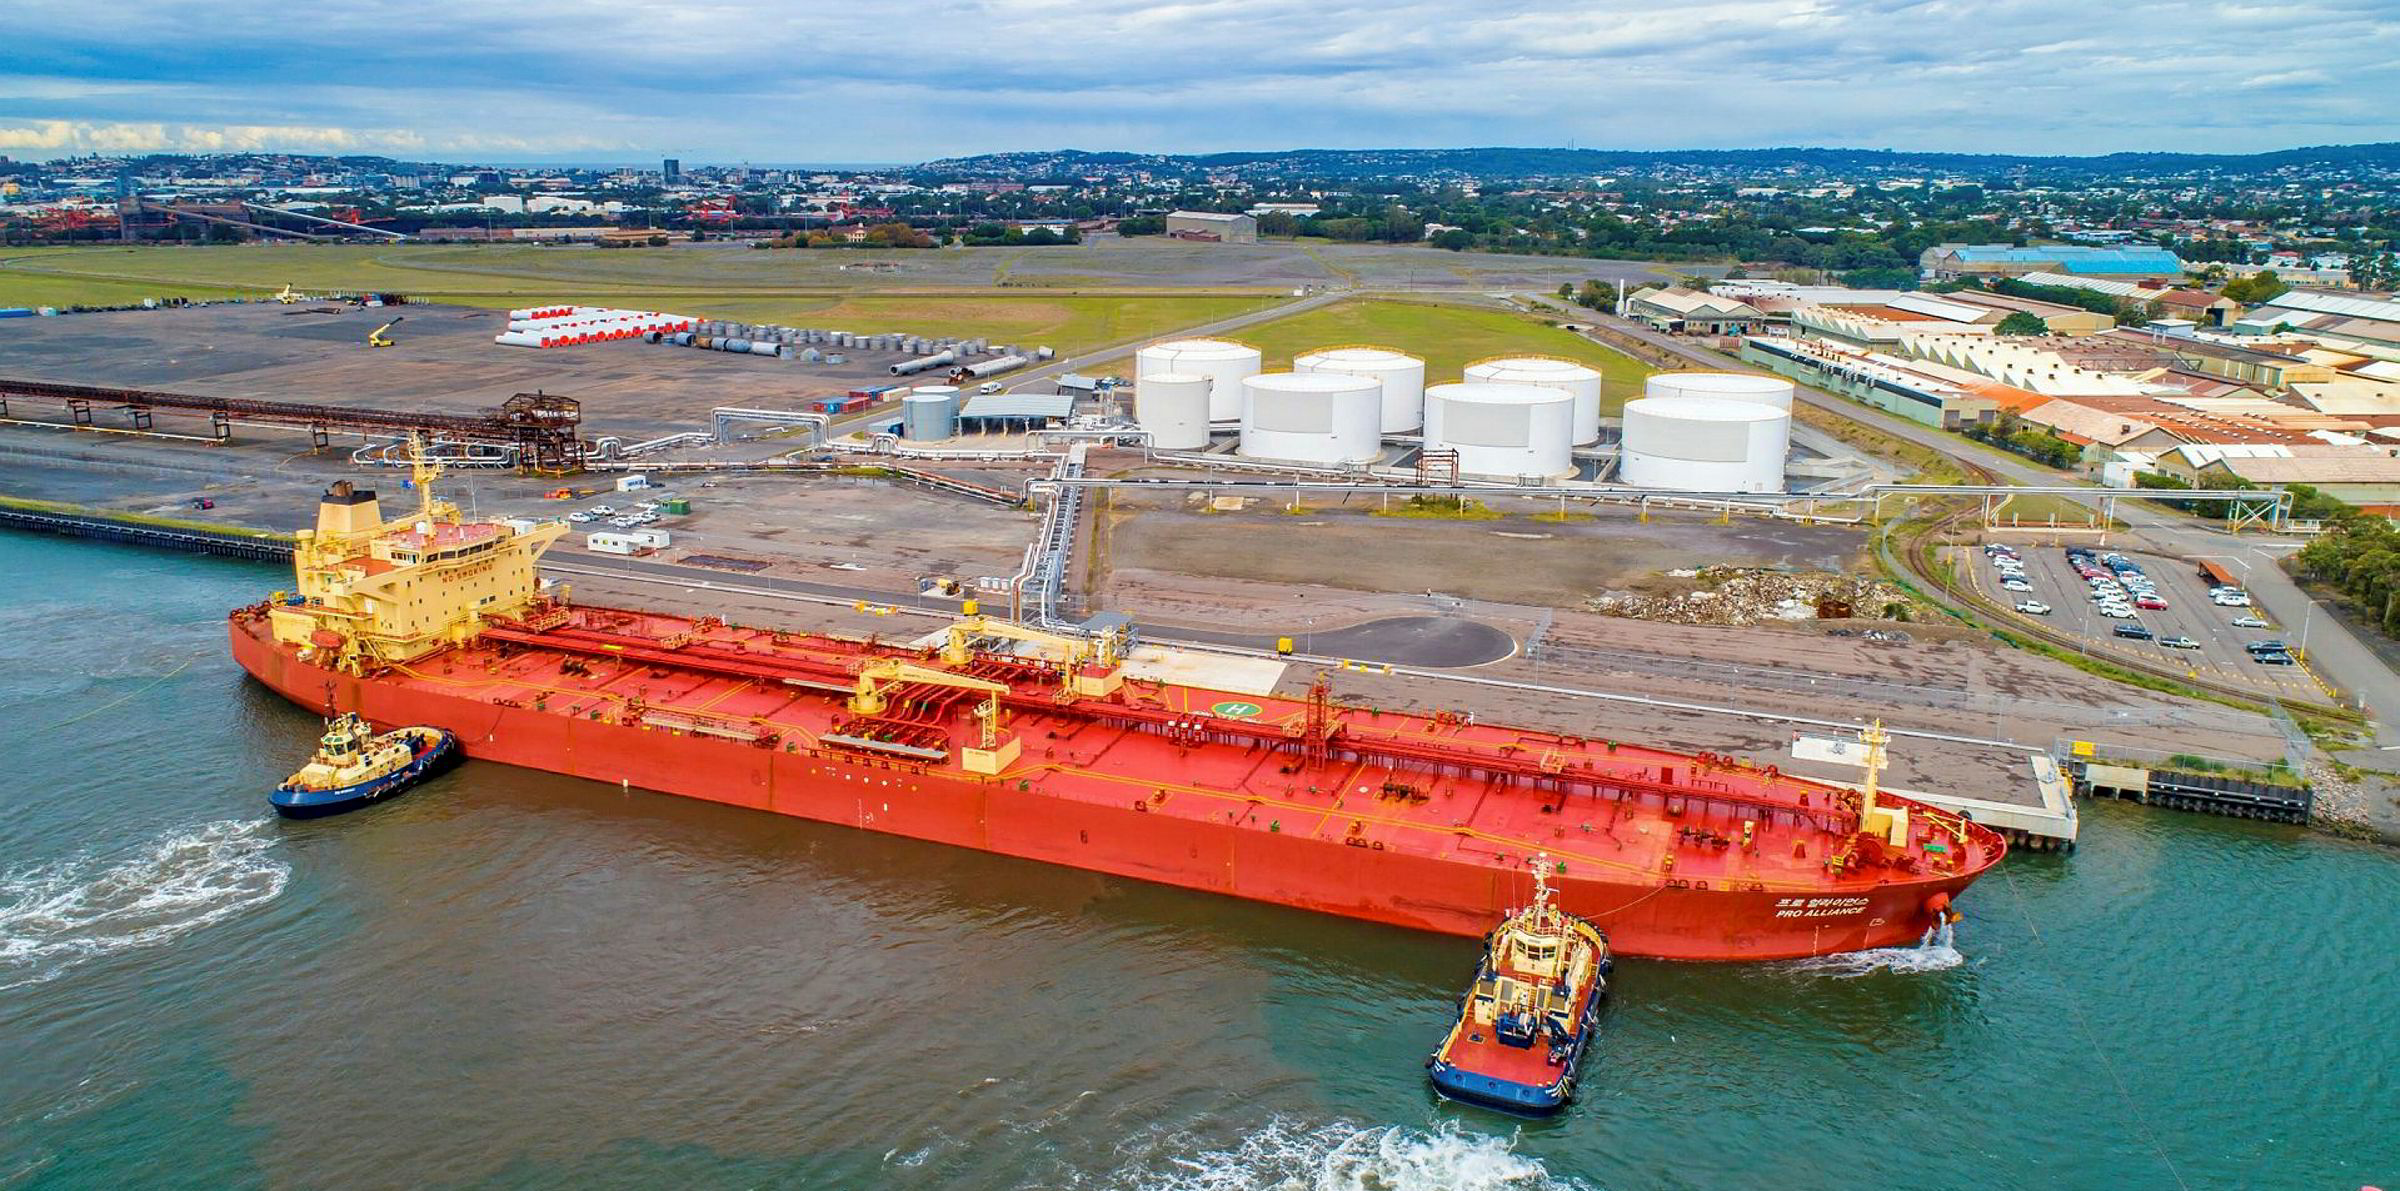 Product tankers in 'dreadful reading' as refineries cut exports | TradeWinds